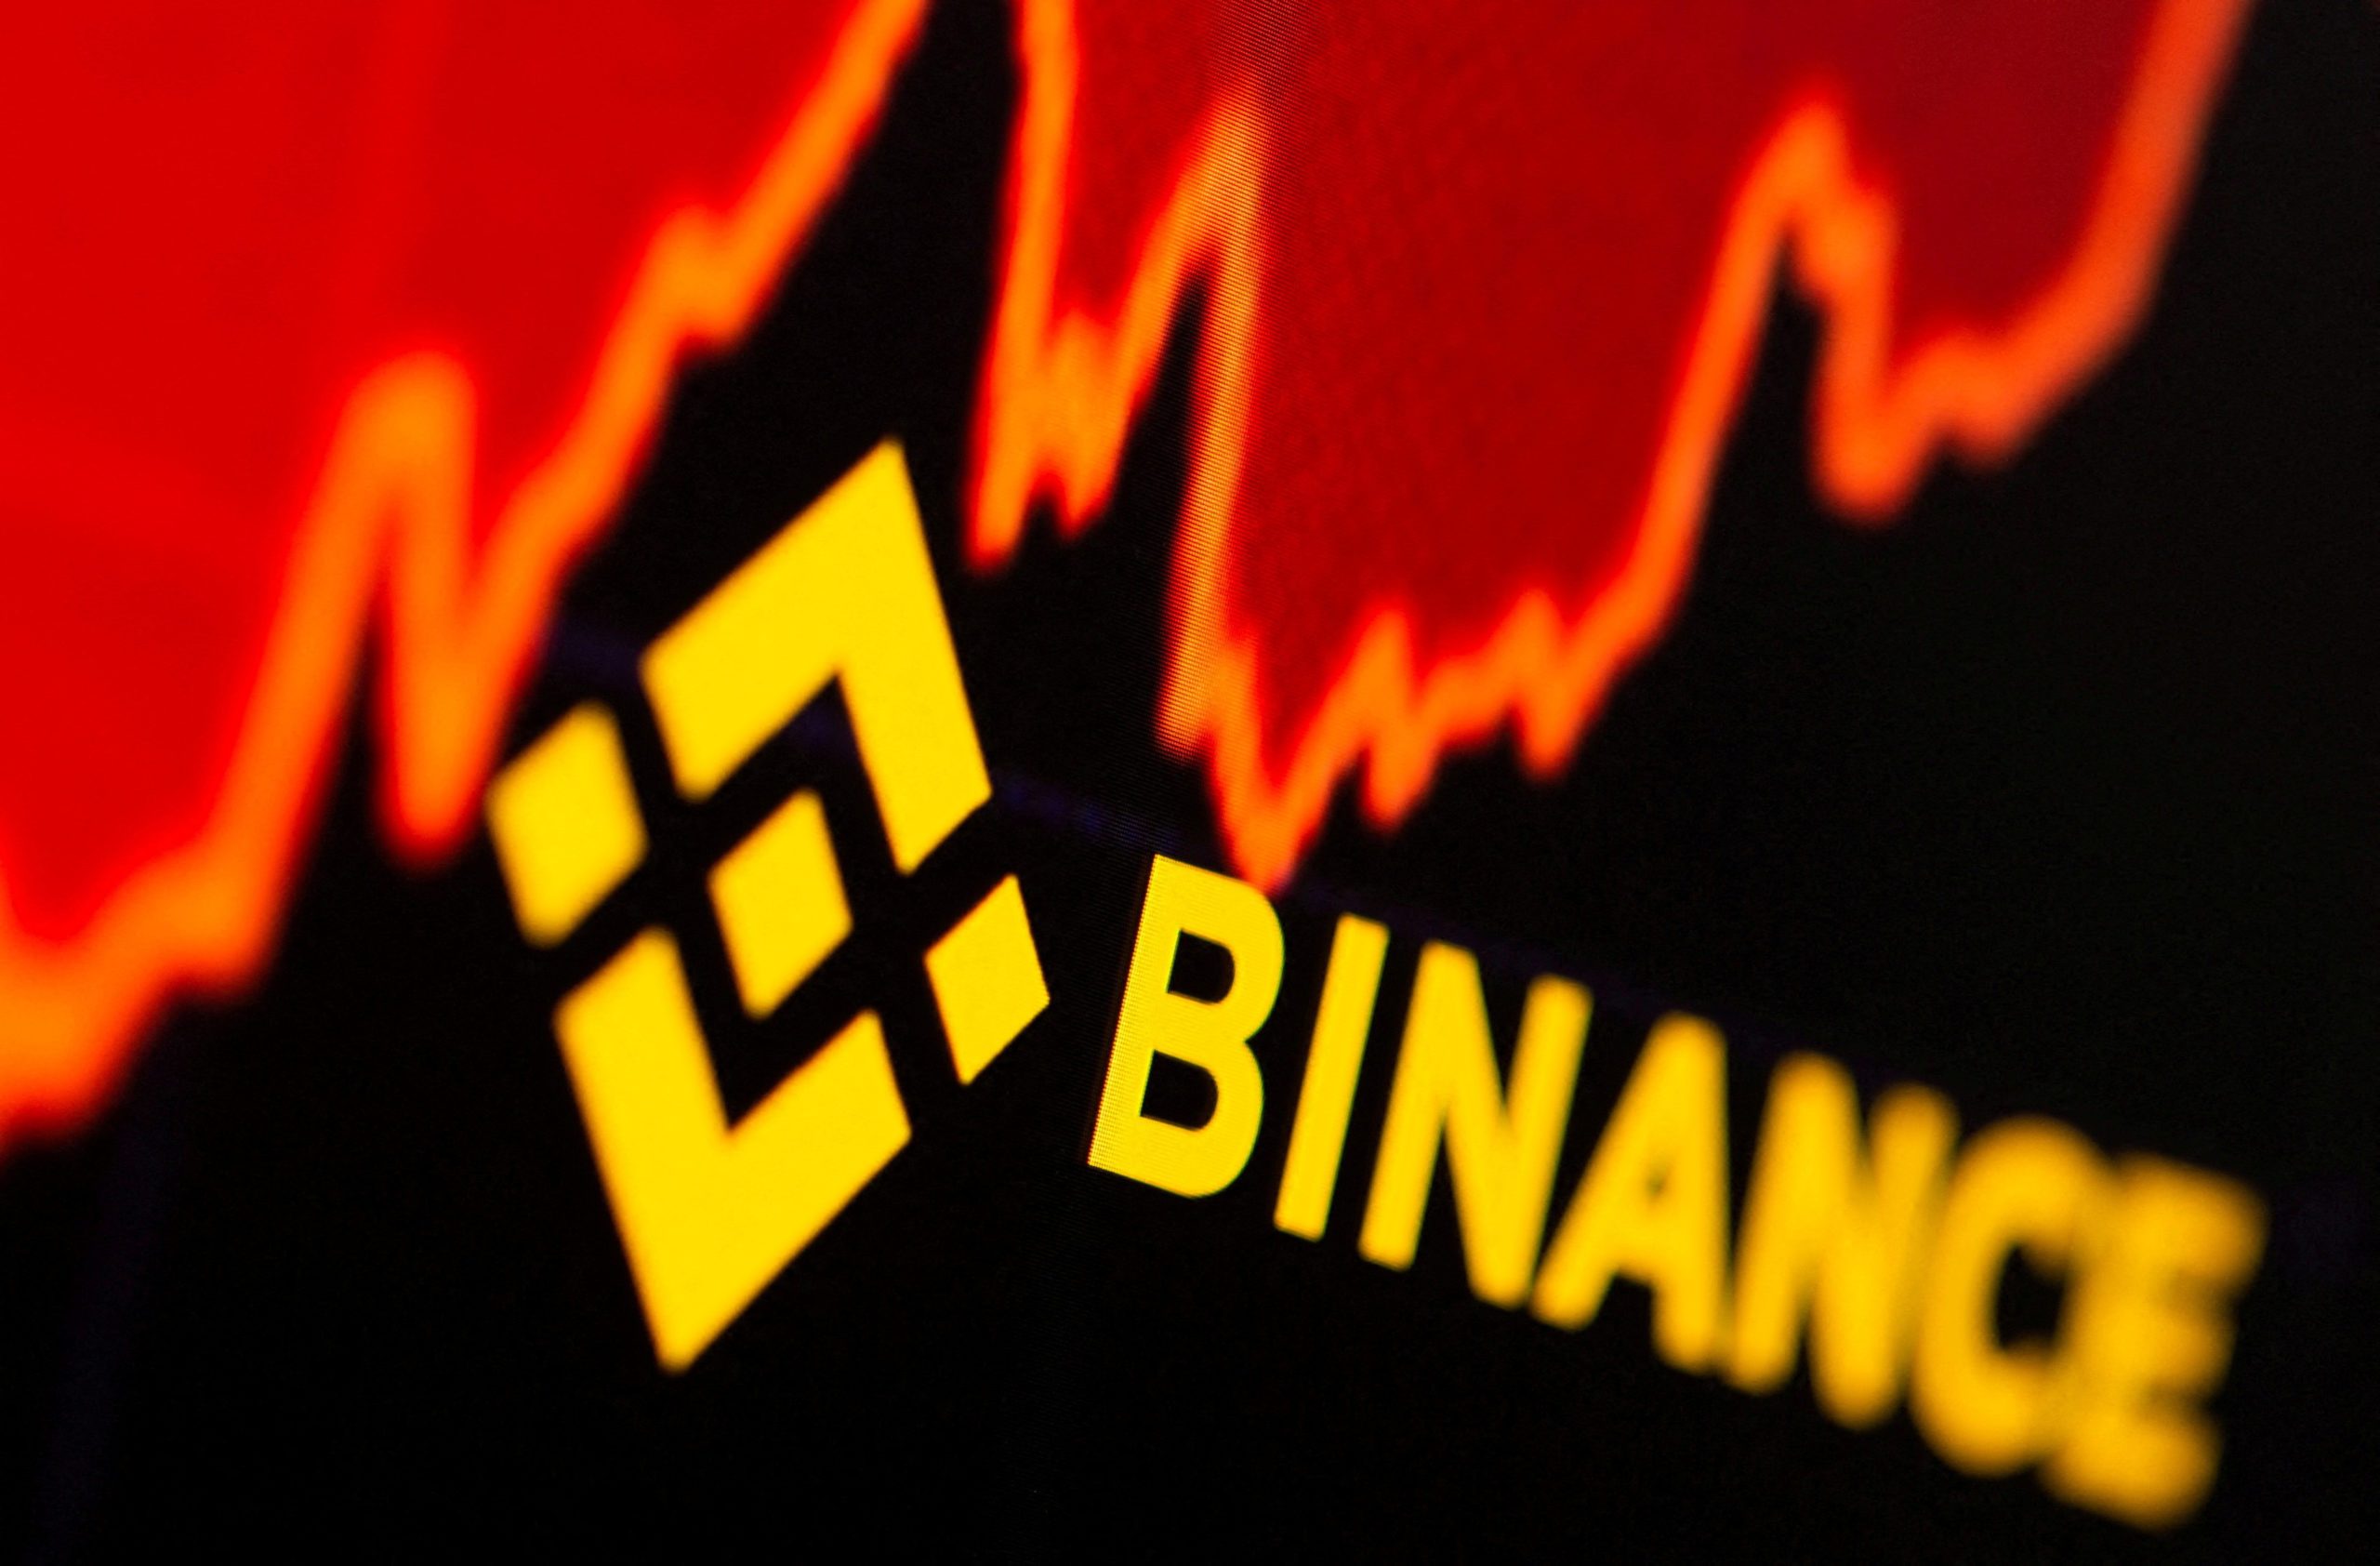 SEC files objection to Binance.US's deal to buy Voyager Digital